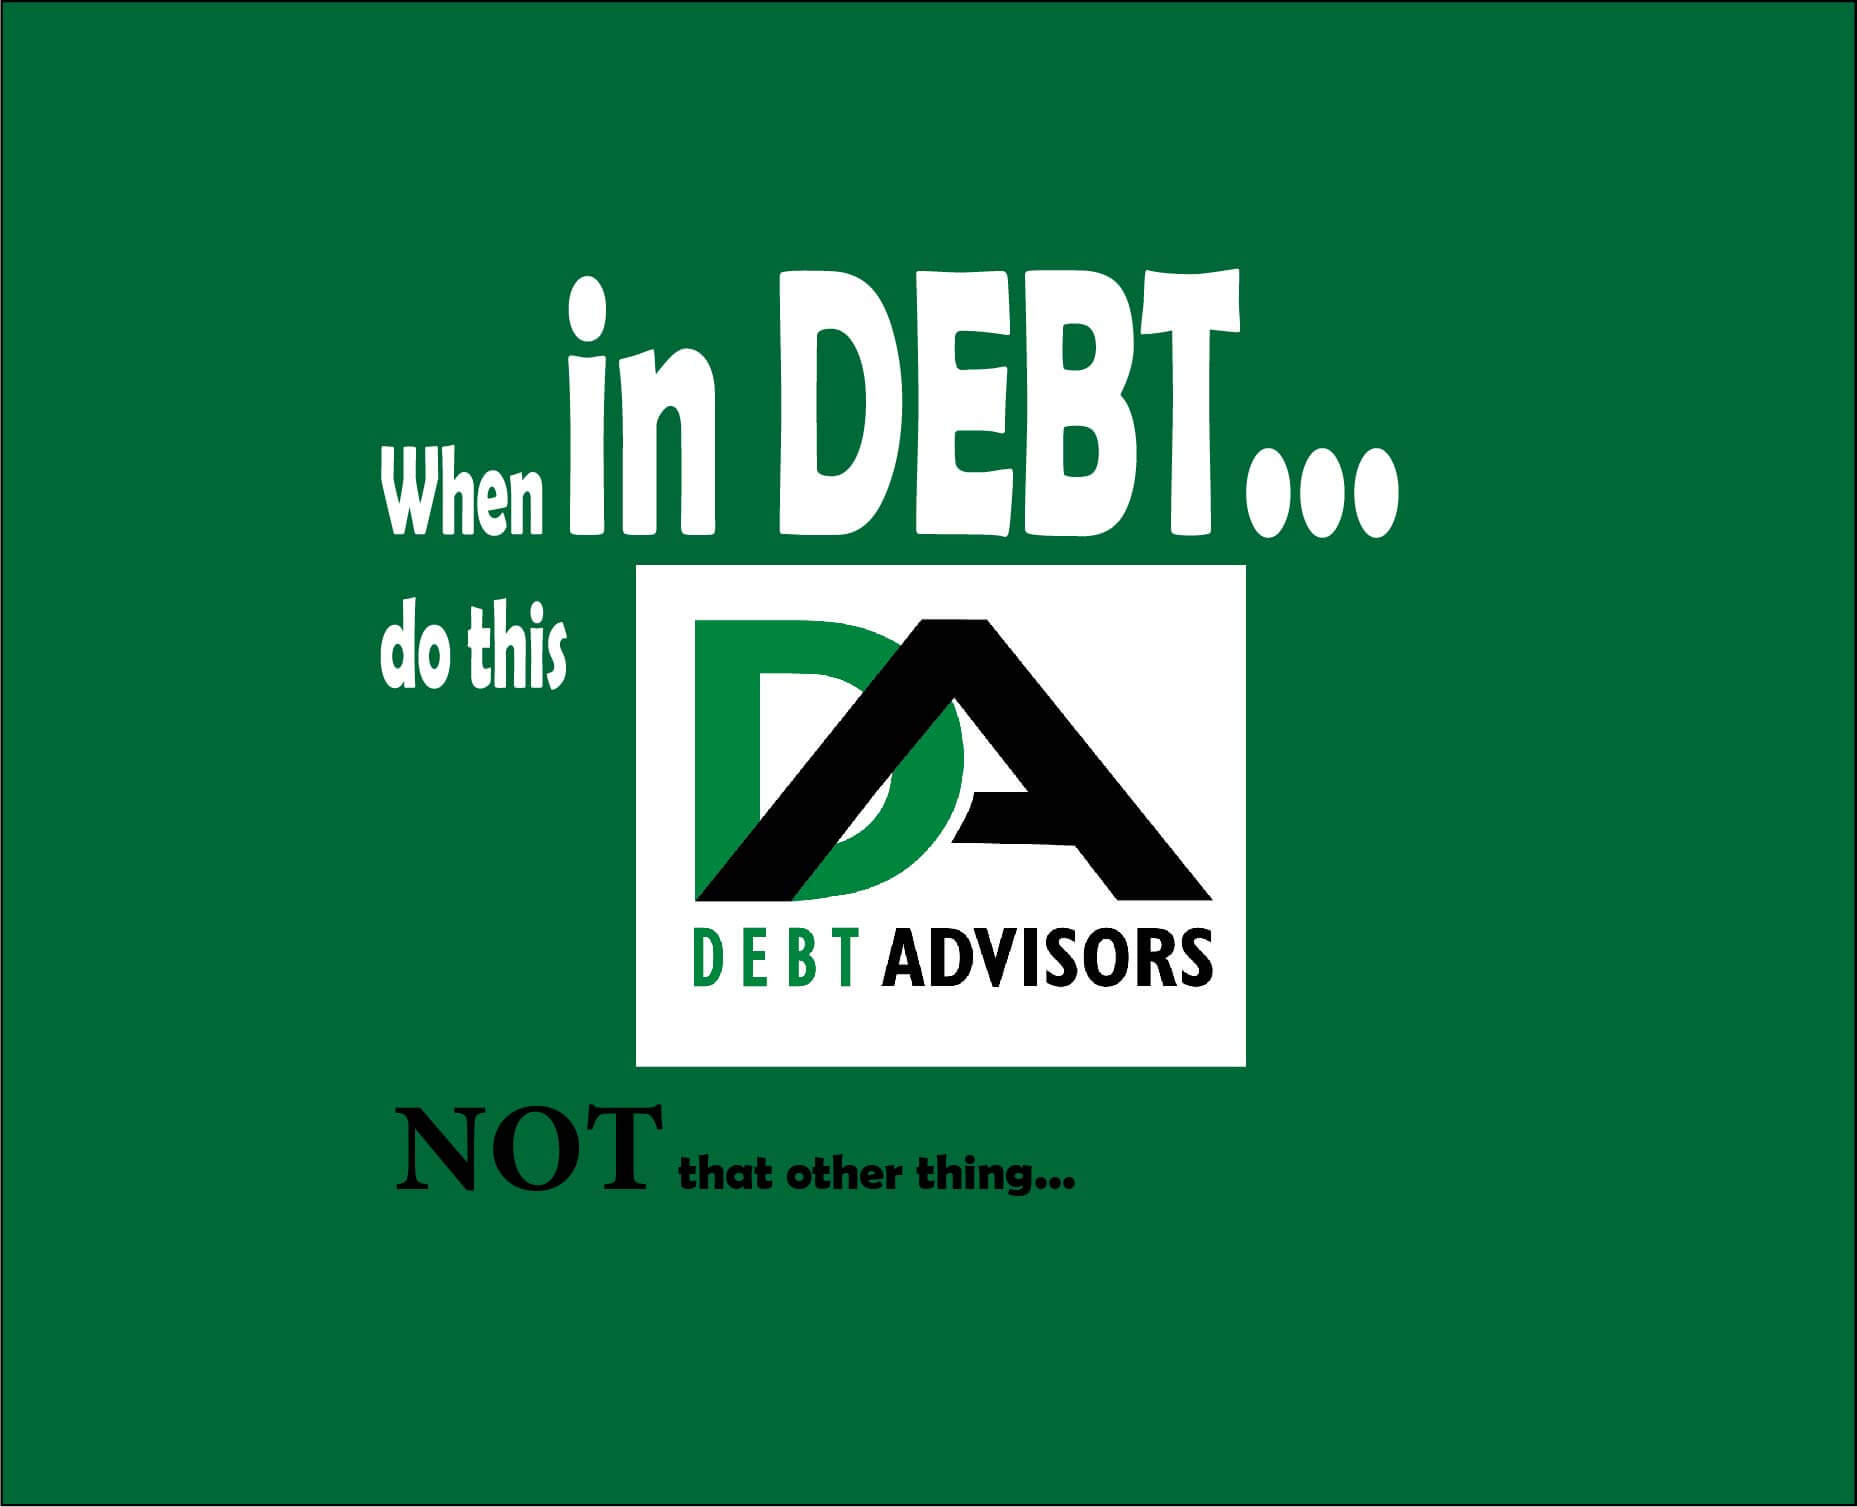 learn more about debt statute of limitations in wisconsin and how milwaukee debt advisors help people who are in a financial struggle get back on their feet again